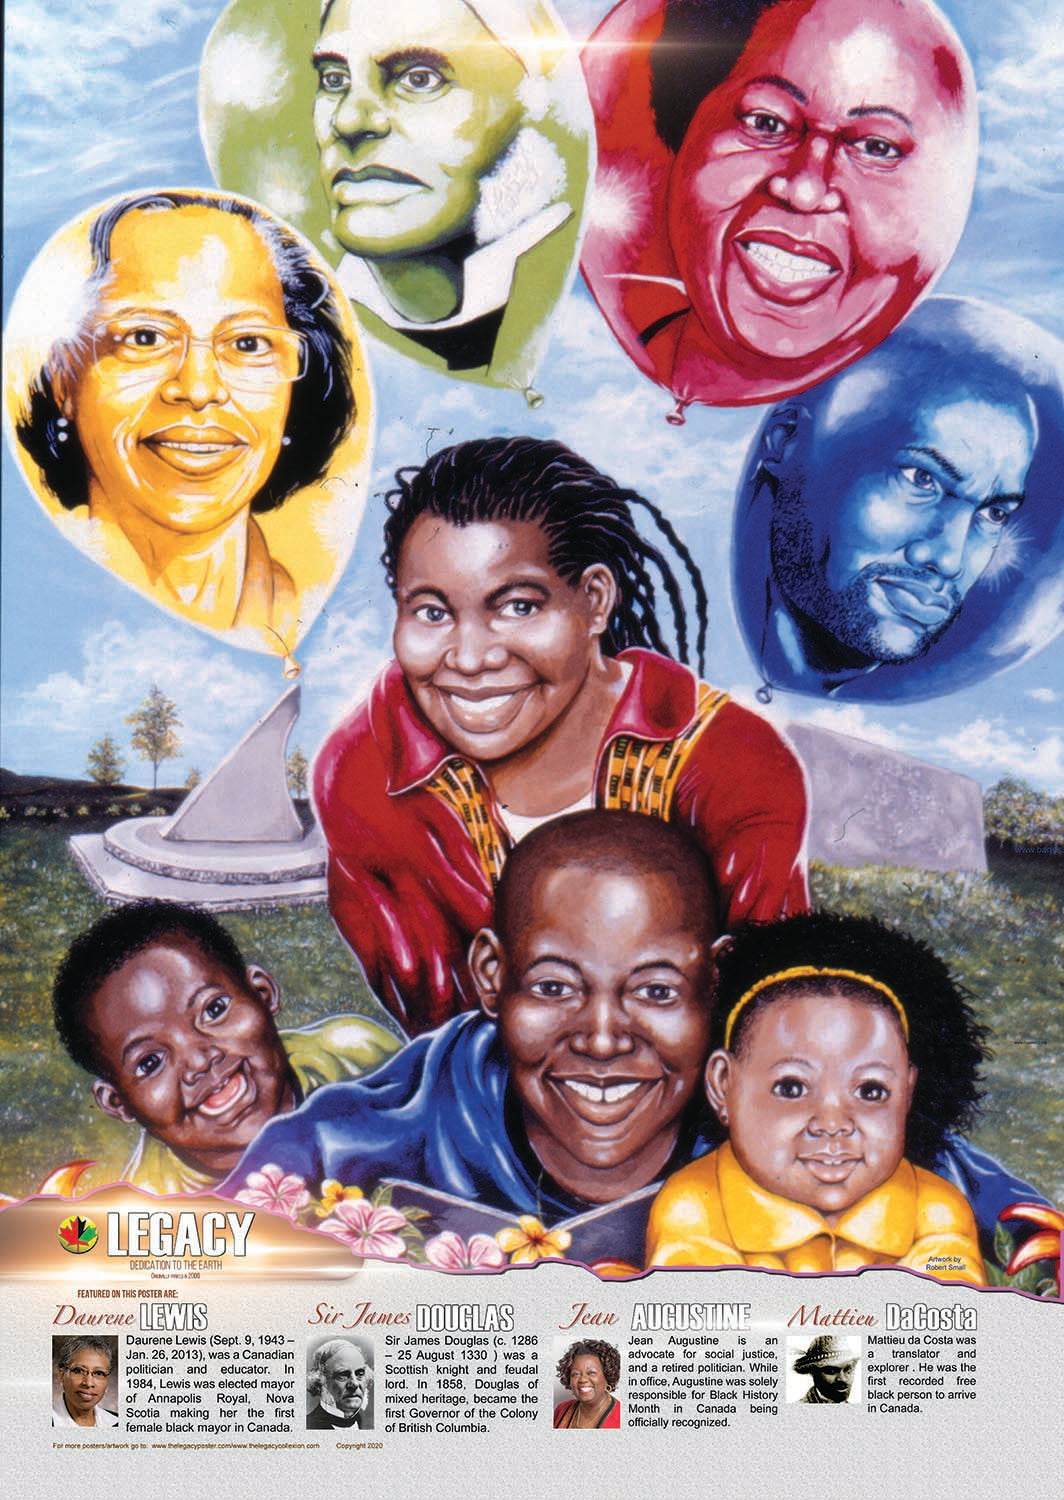 “An educational poster, ideal for Black History Month featuring politician Dr. Daurene Lewis, Governor Sir James Douglas, politician Jean Augustine and explorer Mattieu DaCosta created by African-Canadian artist Robert Small.”